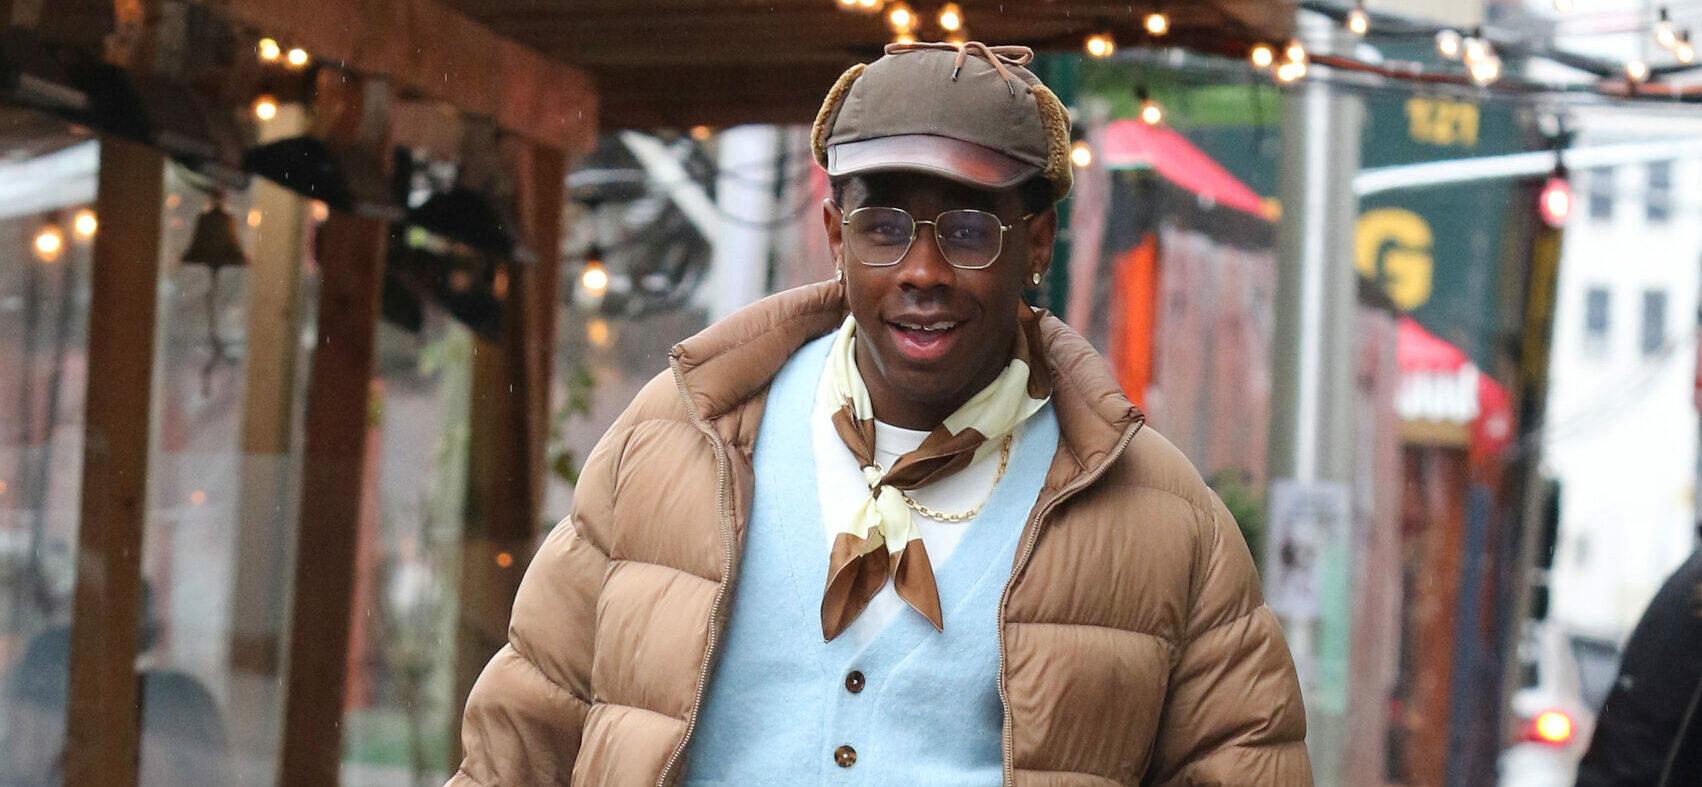 Tyler the Creator looks stylish and sports light-blue painted nails while out for a walk in NYC